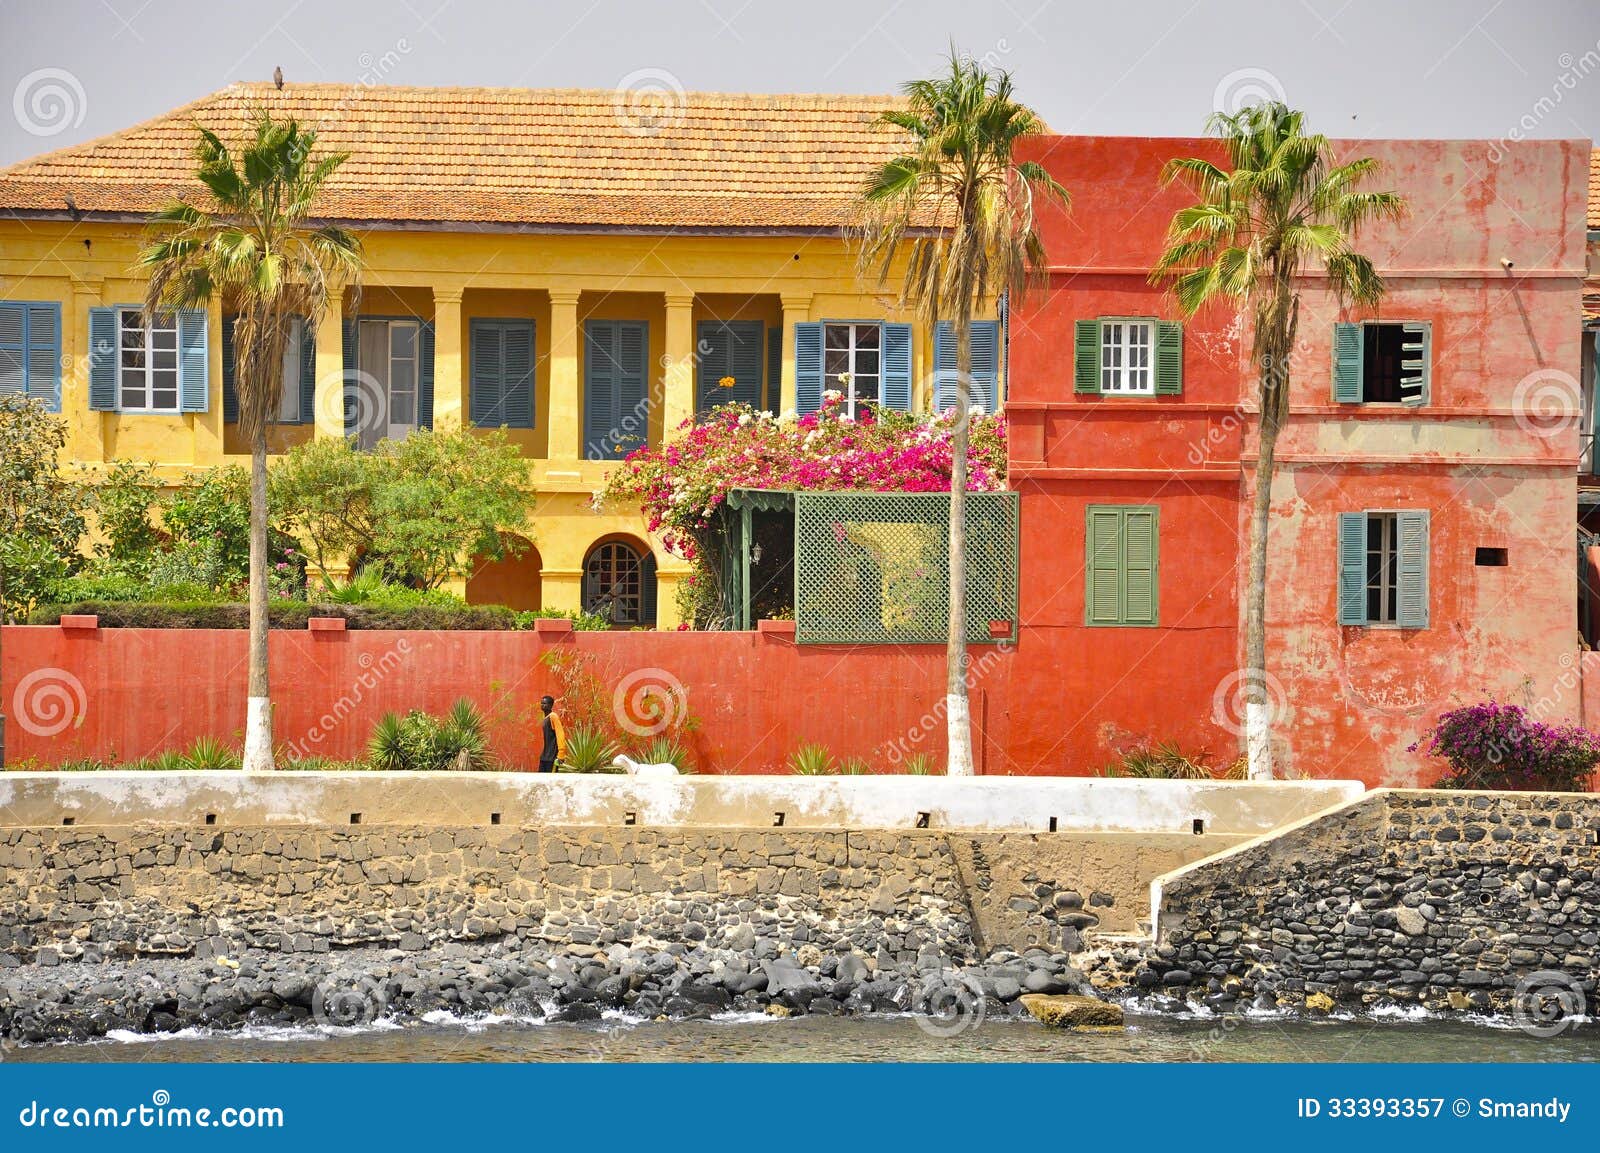 colored houses on the island of goree, senegal